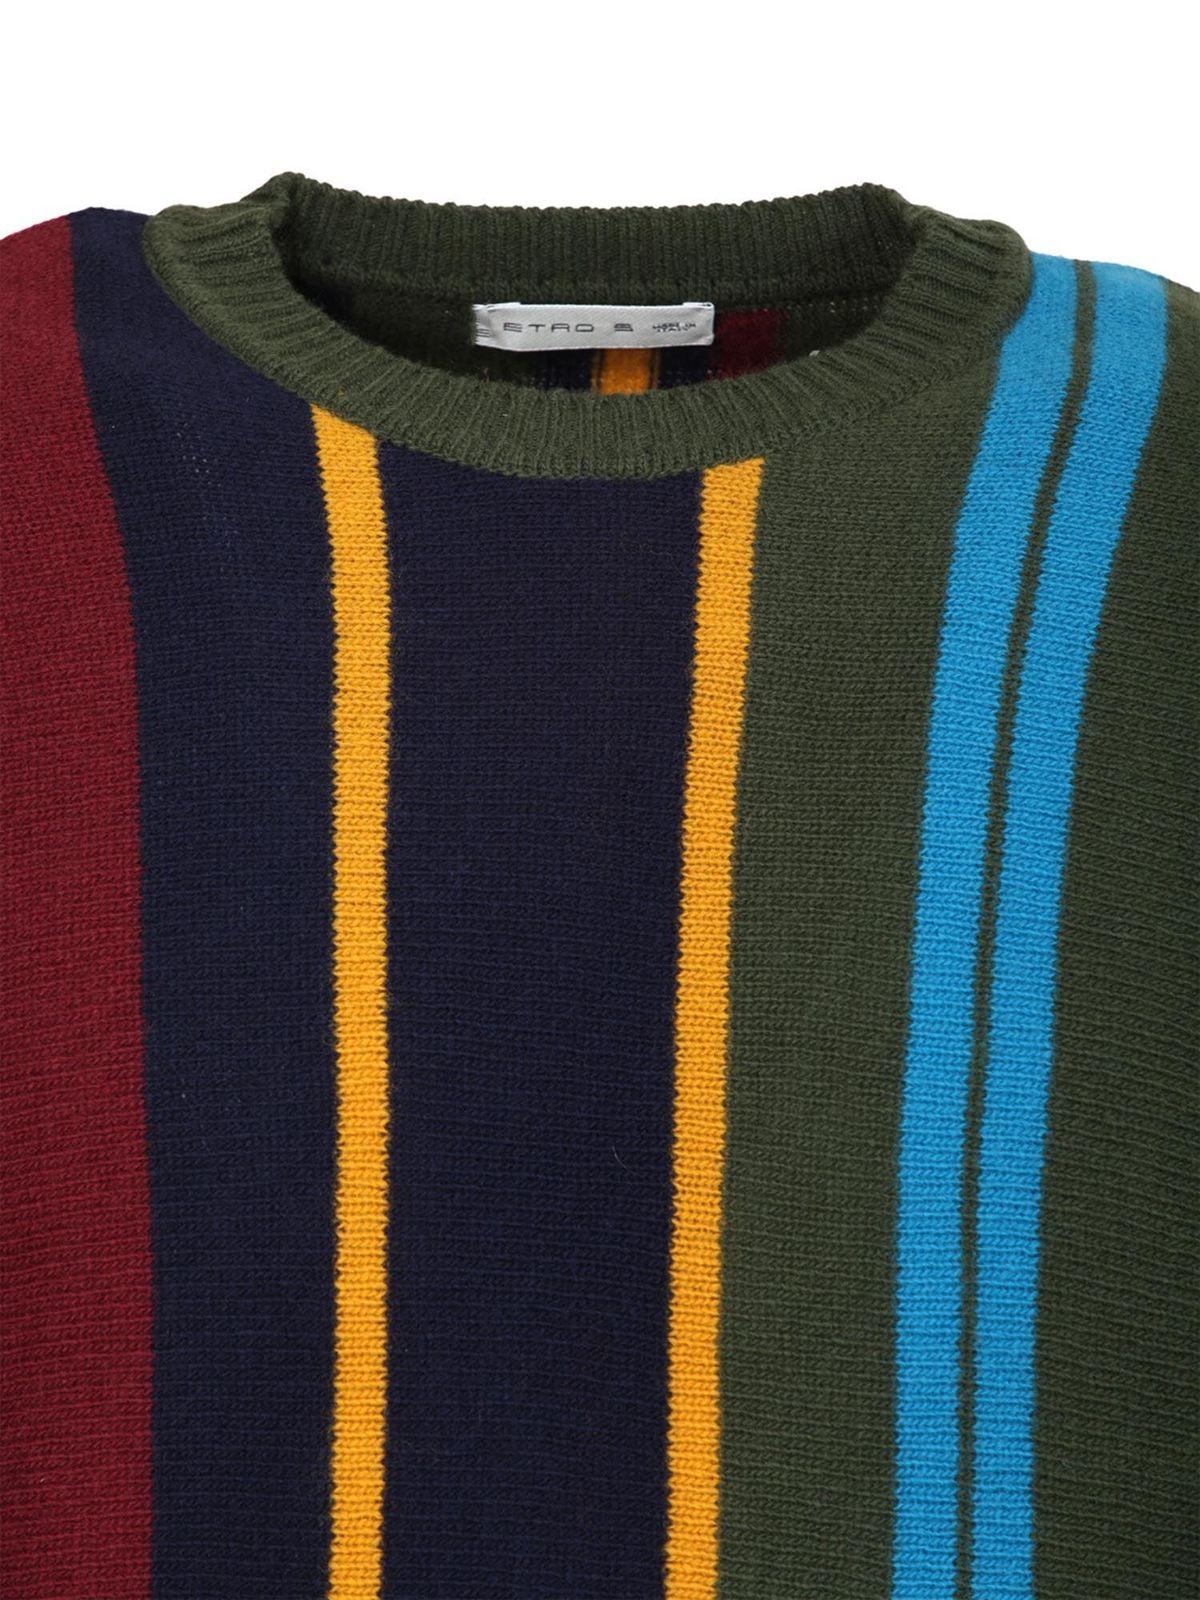 Etro Wool Striped Crewneck Sweater Multicolor in Blue for Men - Lyst